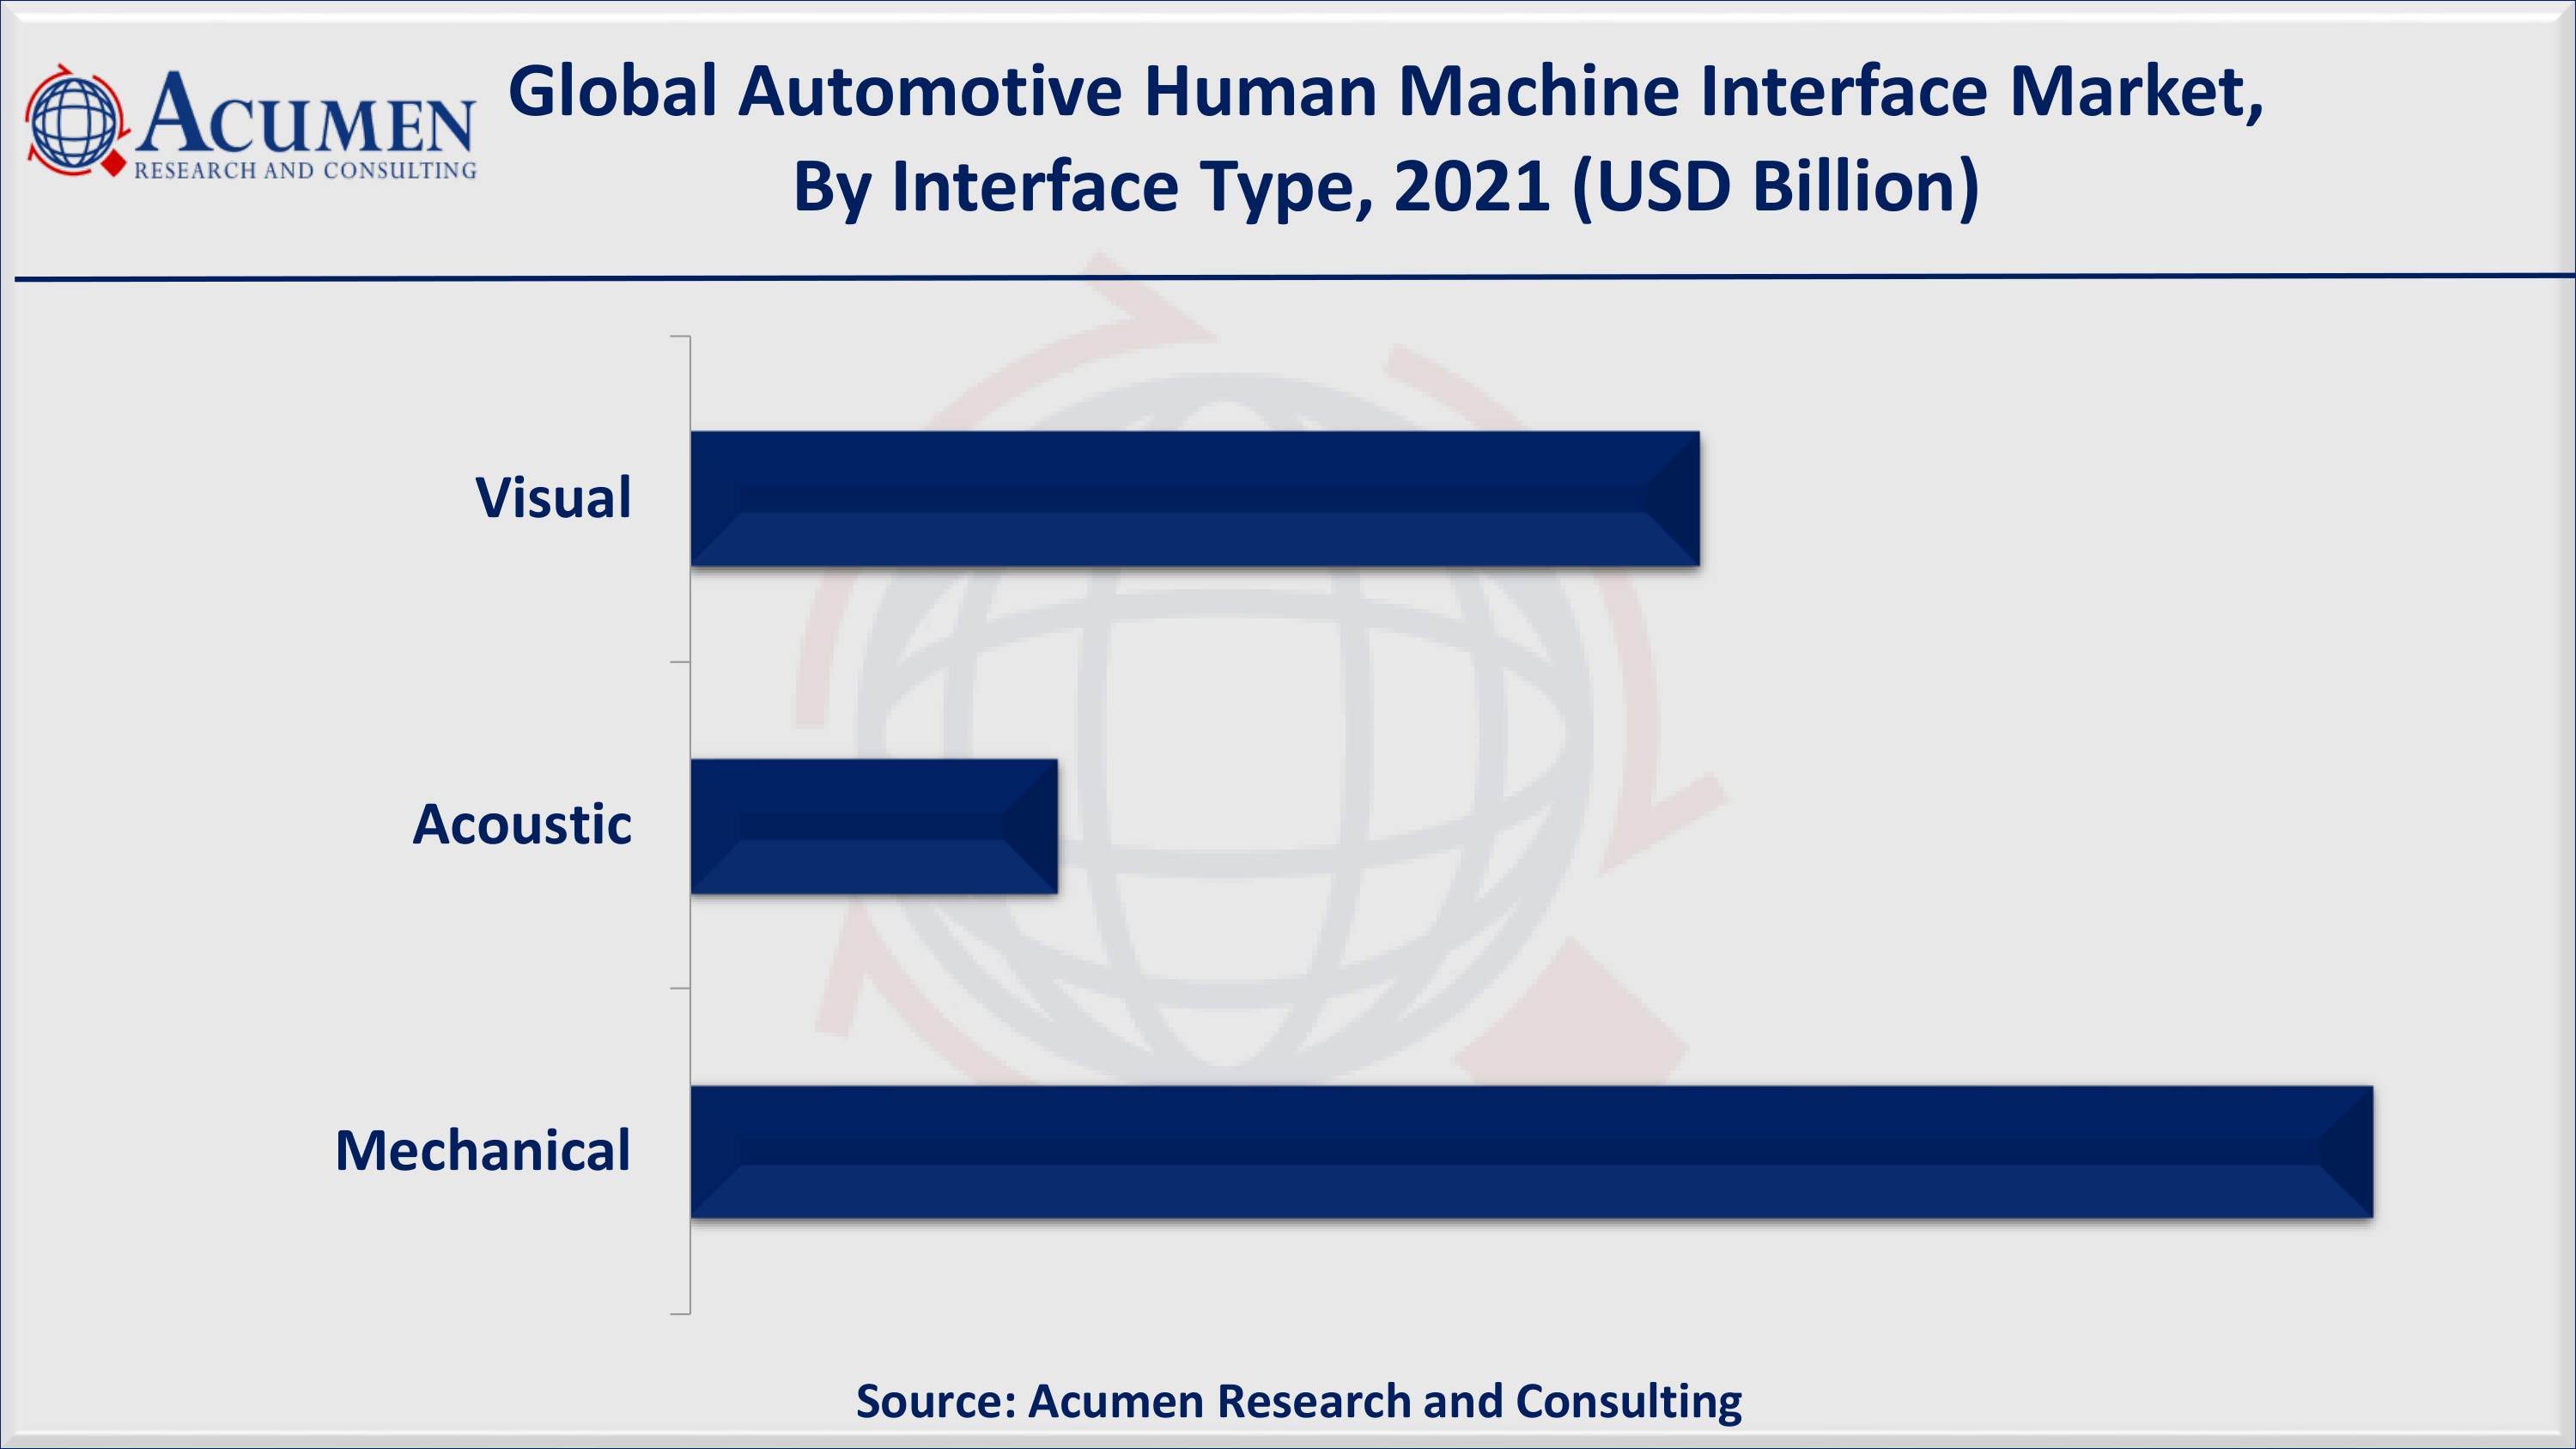 Rising number of road accidents primarily fuels the global automotive human machine interface market value